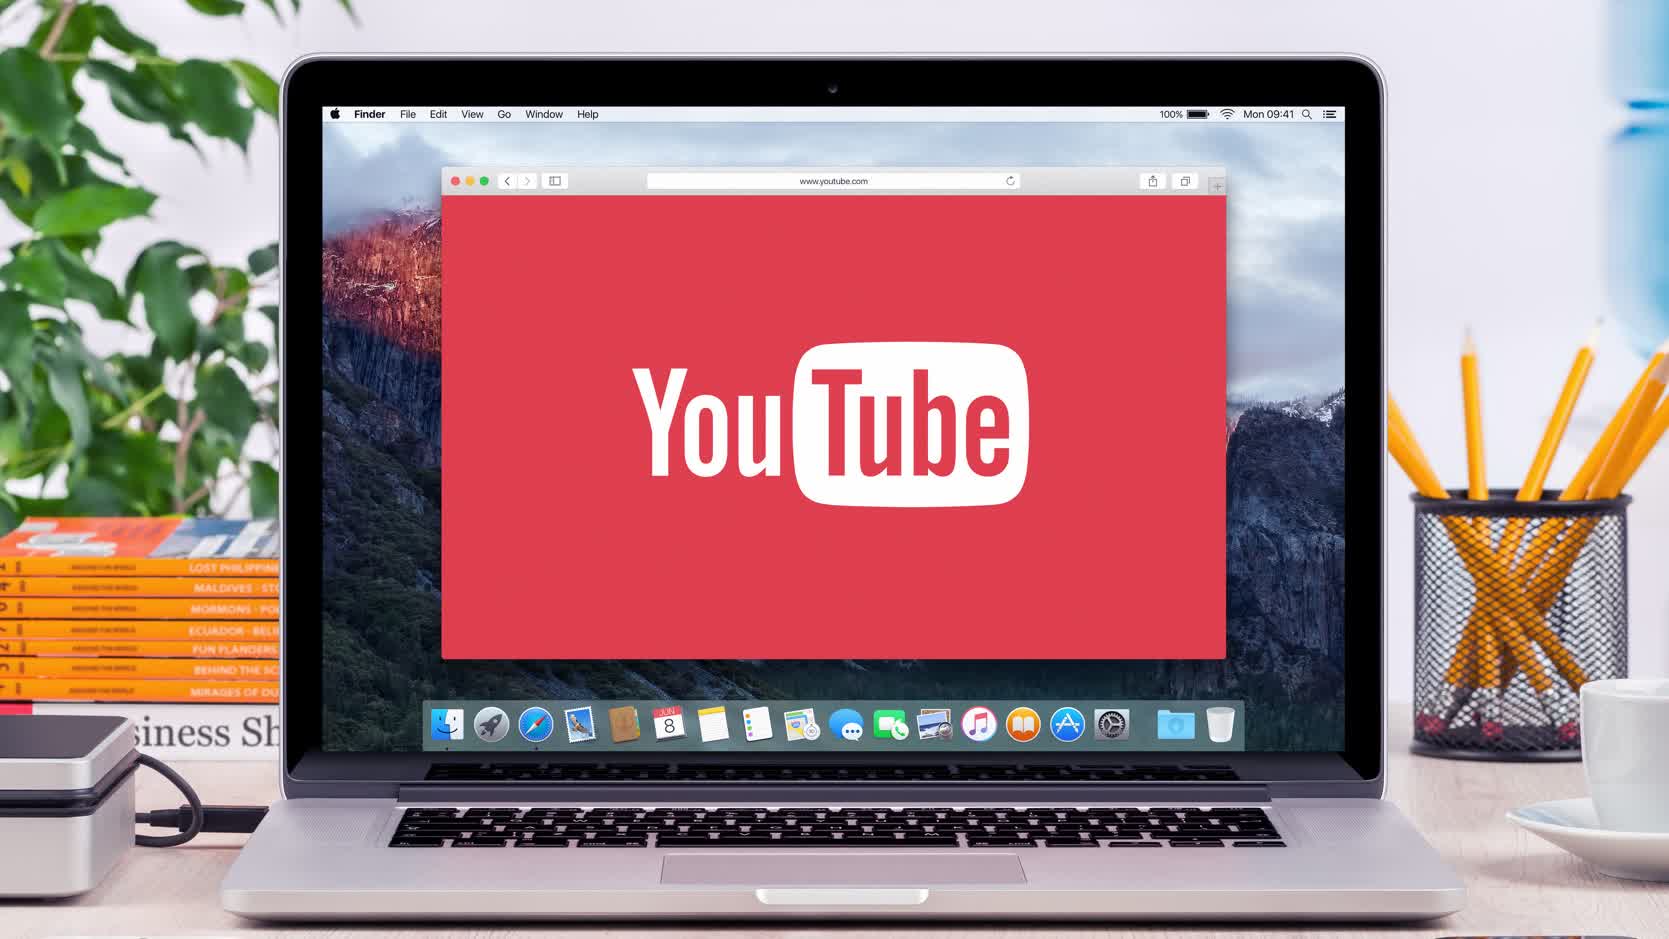 YouTube is letting Premium subscribers experiment with downloading videos on desktop